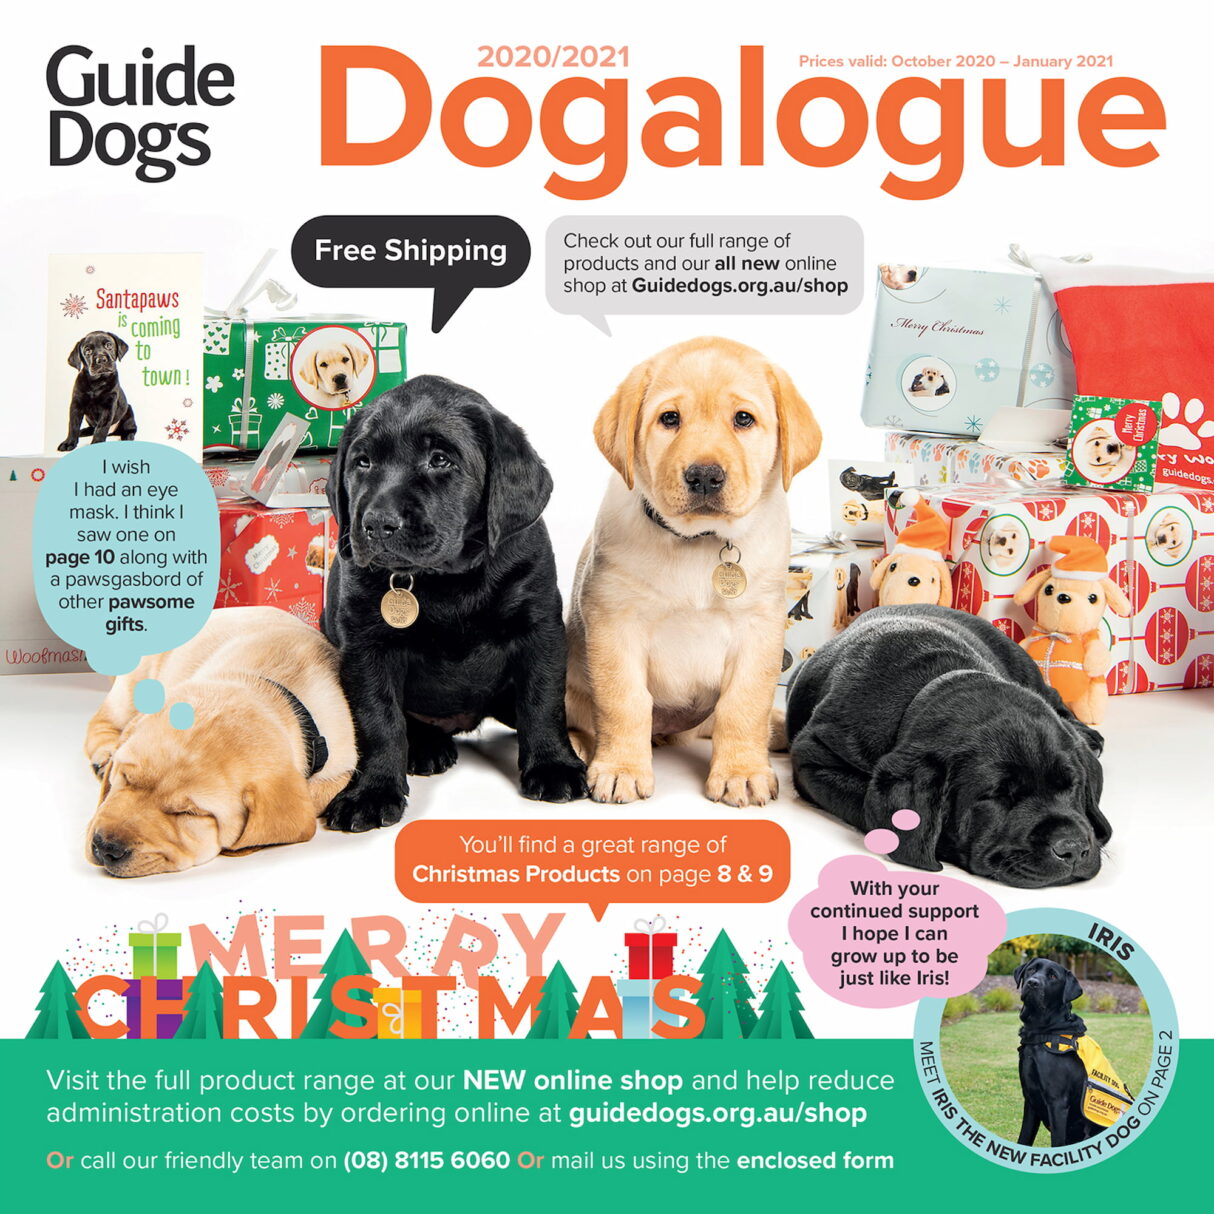 Annual Dogalogue Out Now! Guide Dogs SA/NT